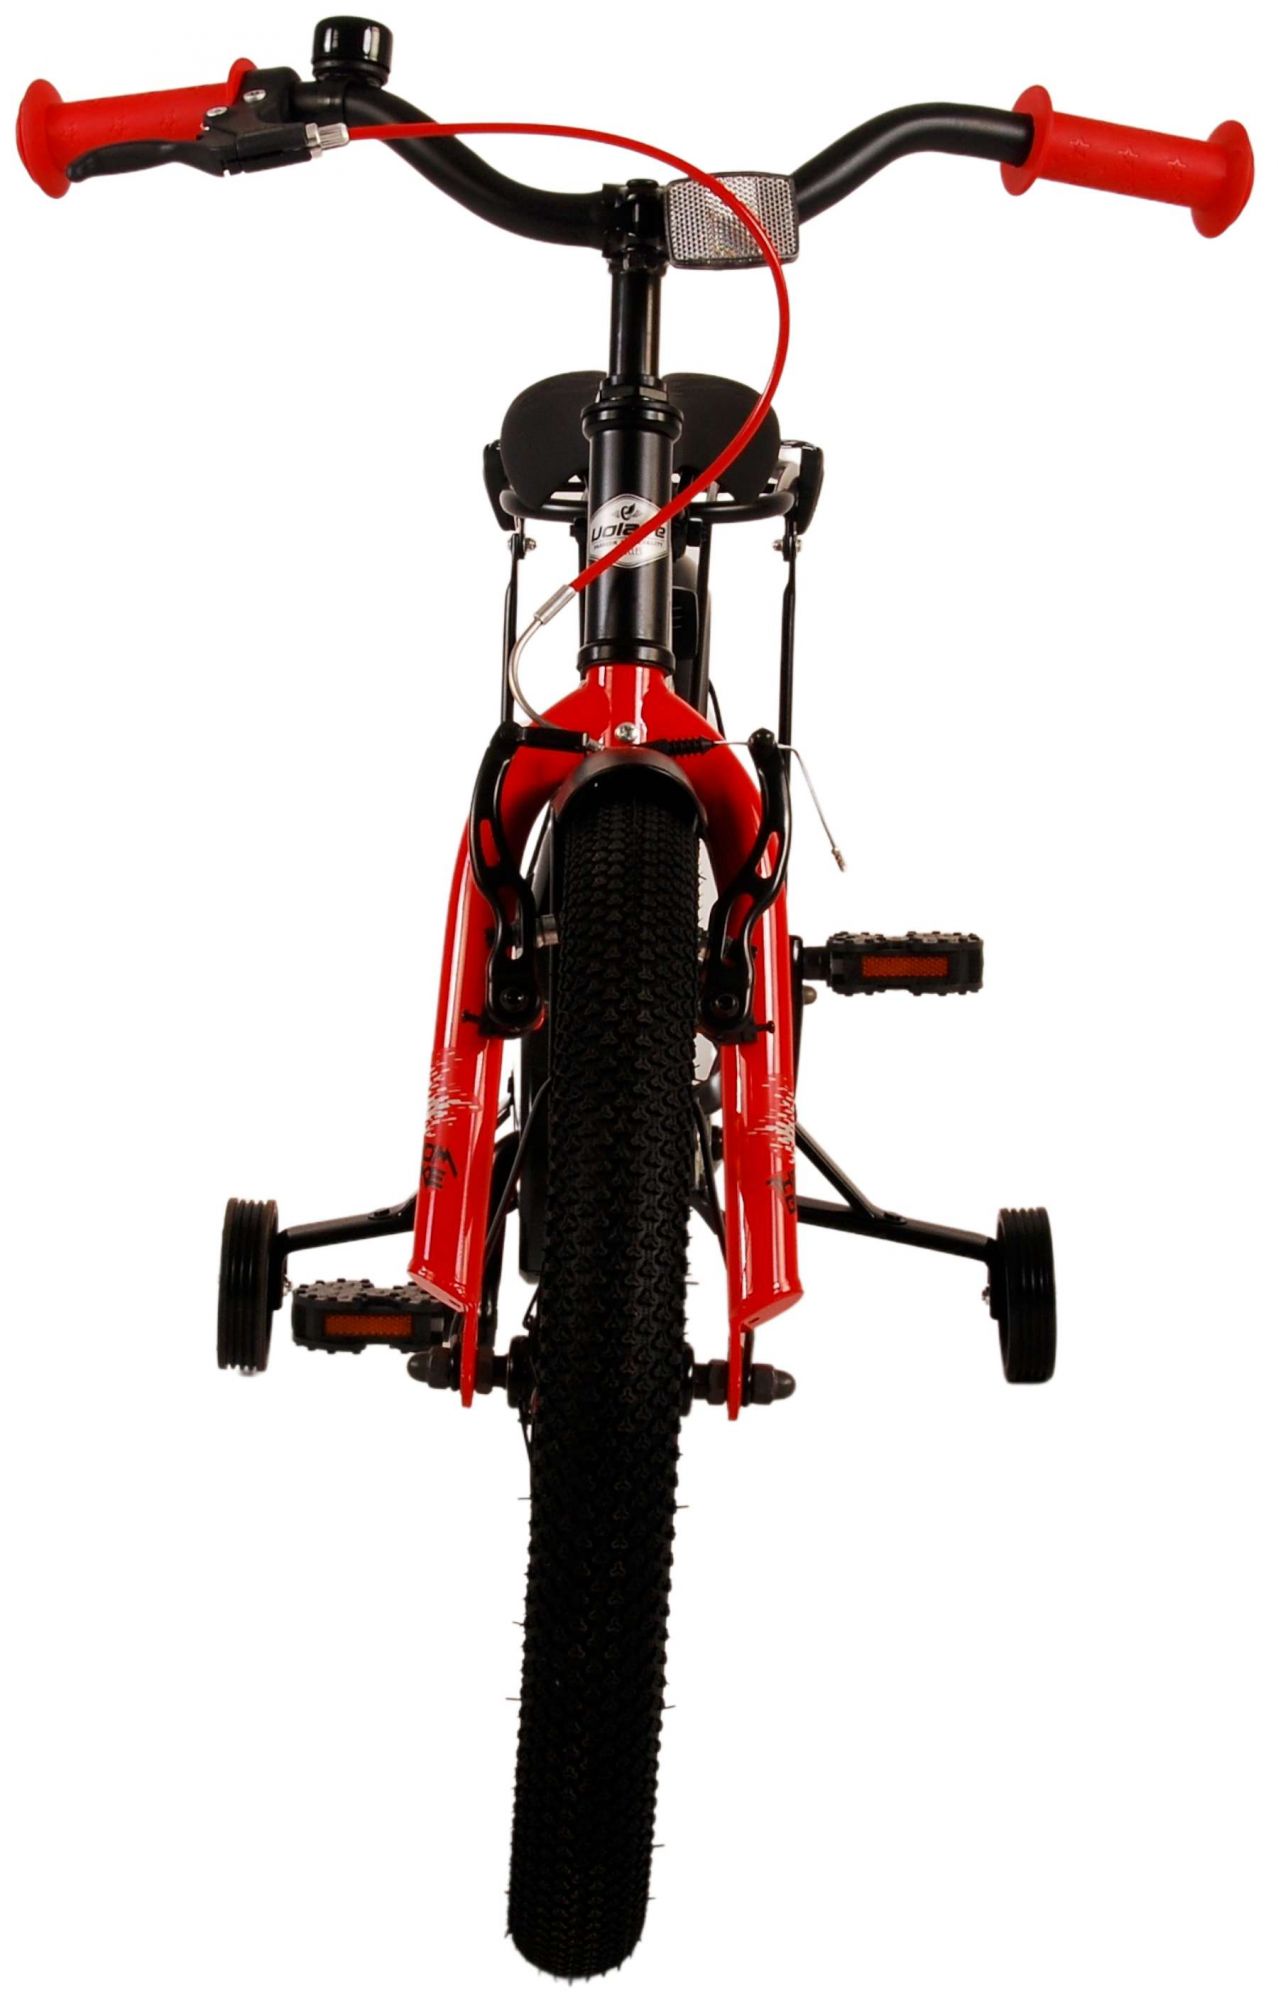 Thombike_18_inch_Rood_-_10-W1800